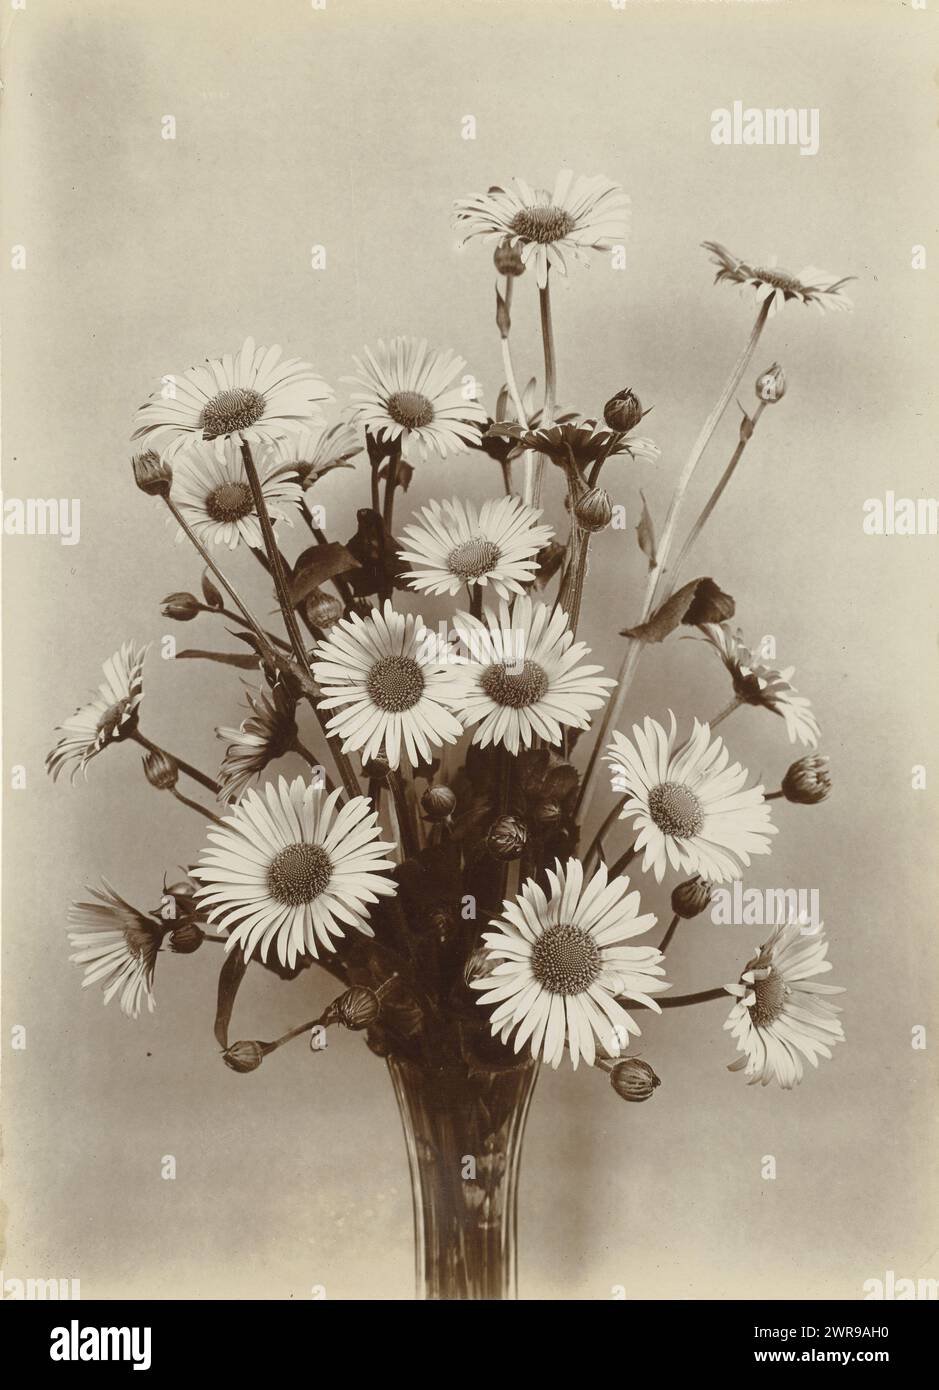 Bunch of plantain sunflowers, Doronicum plantagineum (title on object), Richard Tepe, Netherlands, c. 1900 - c. 1930, photographic support, height 227 mm × width 163 mm, photograph Stock Photo